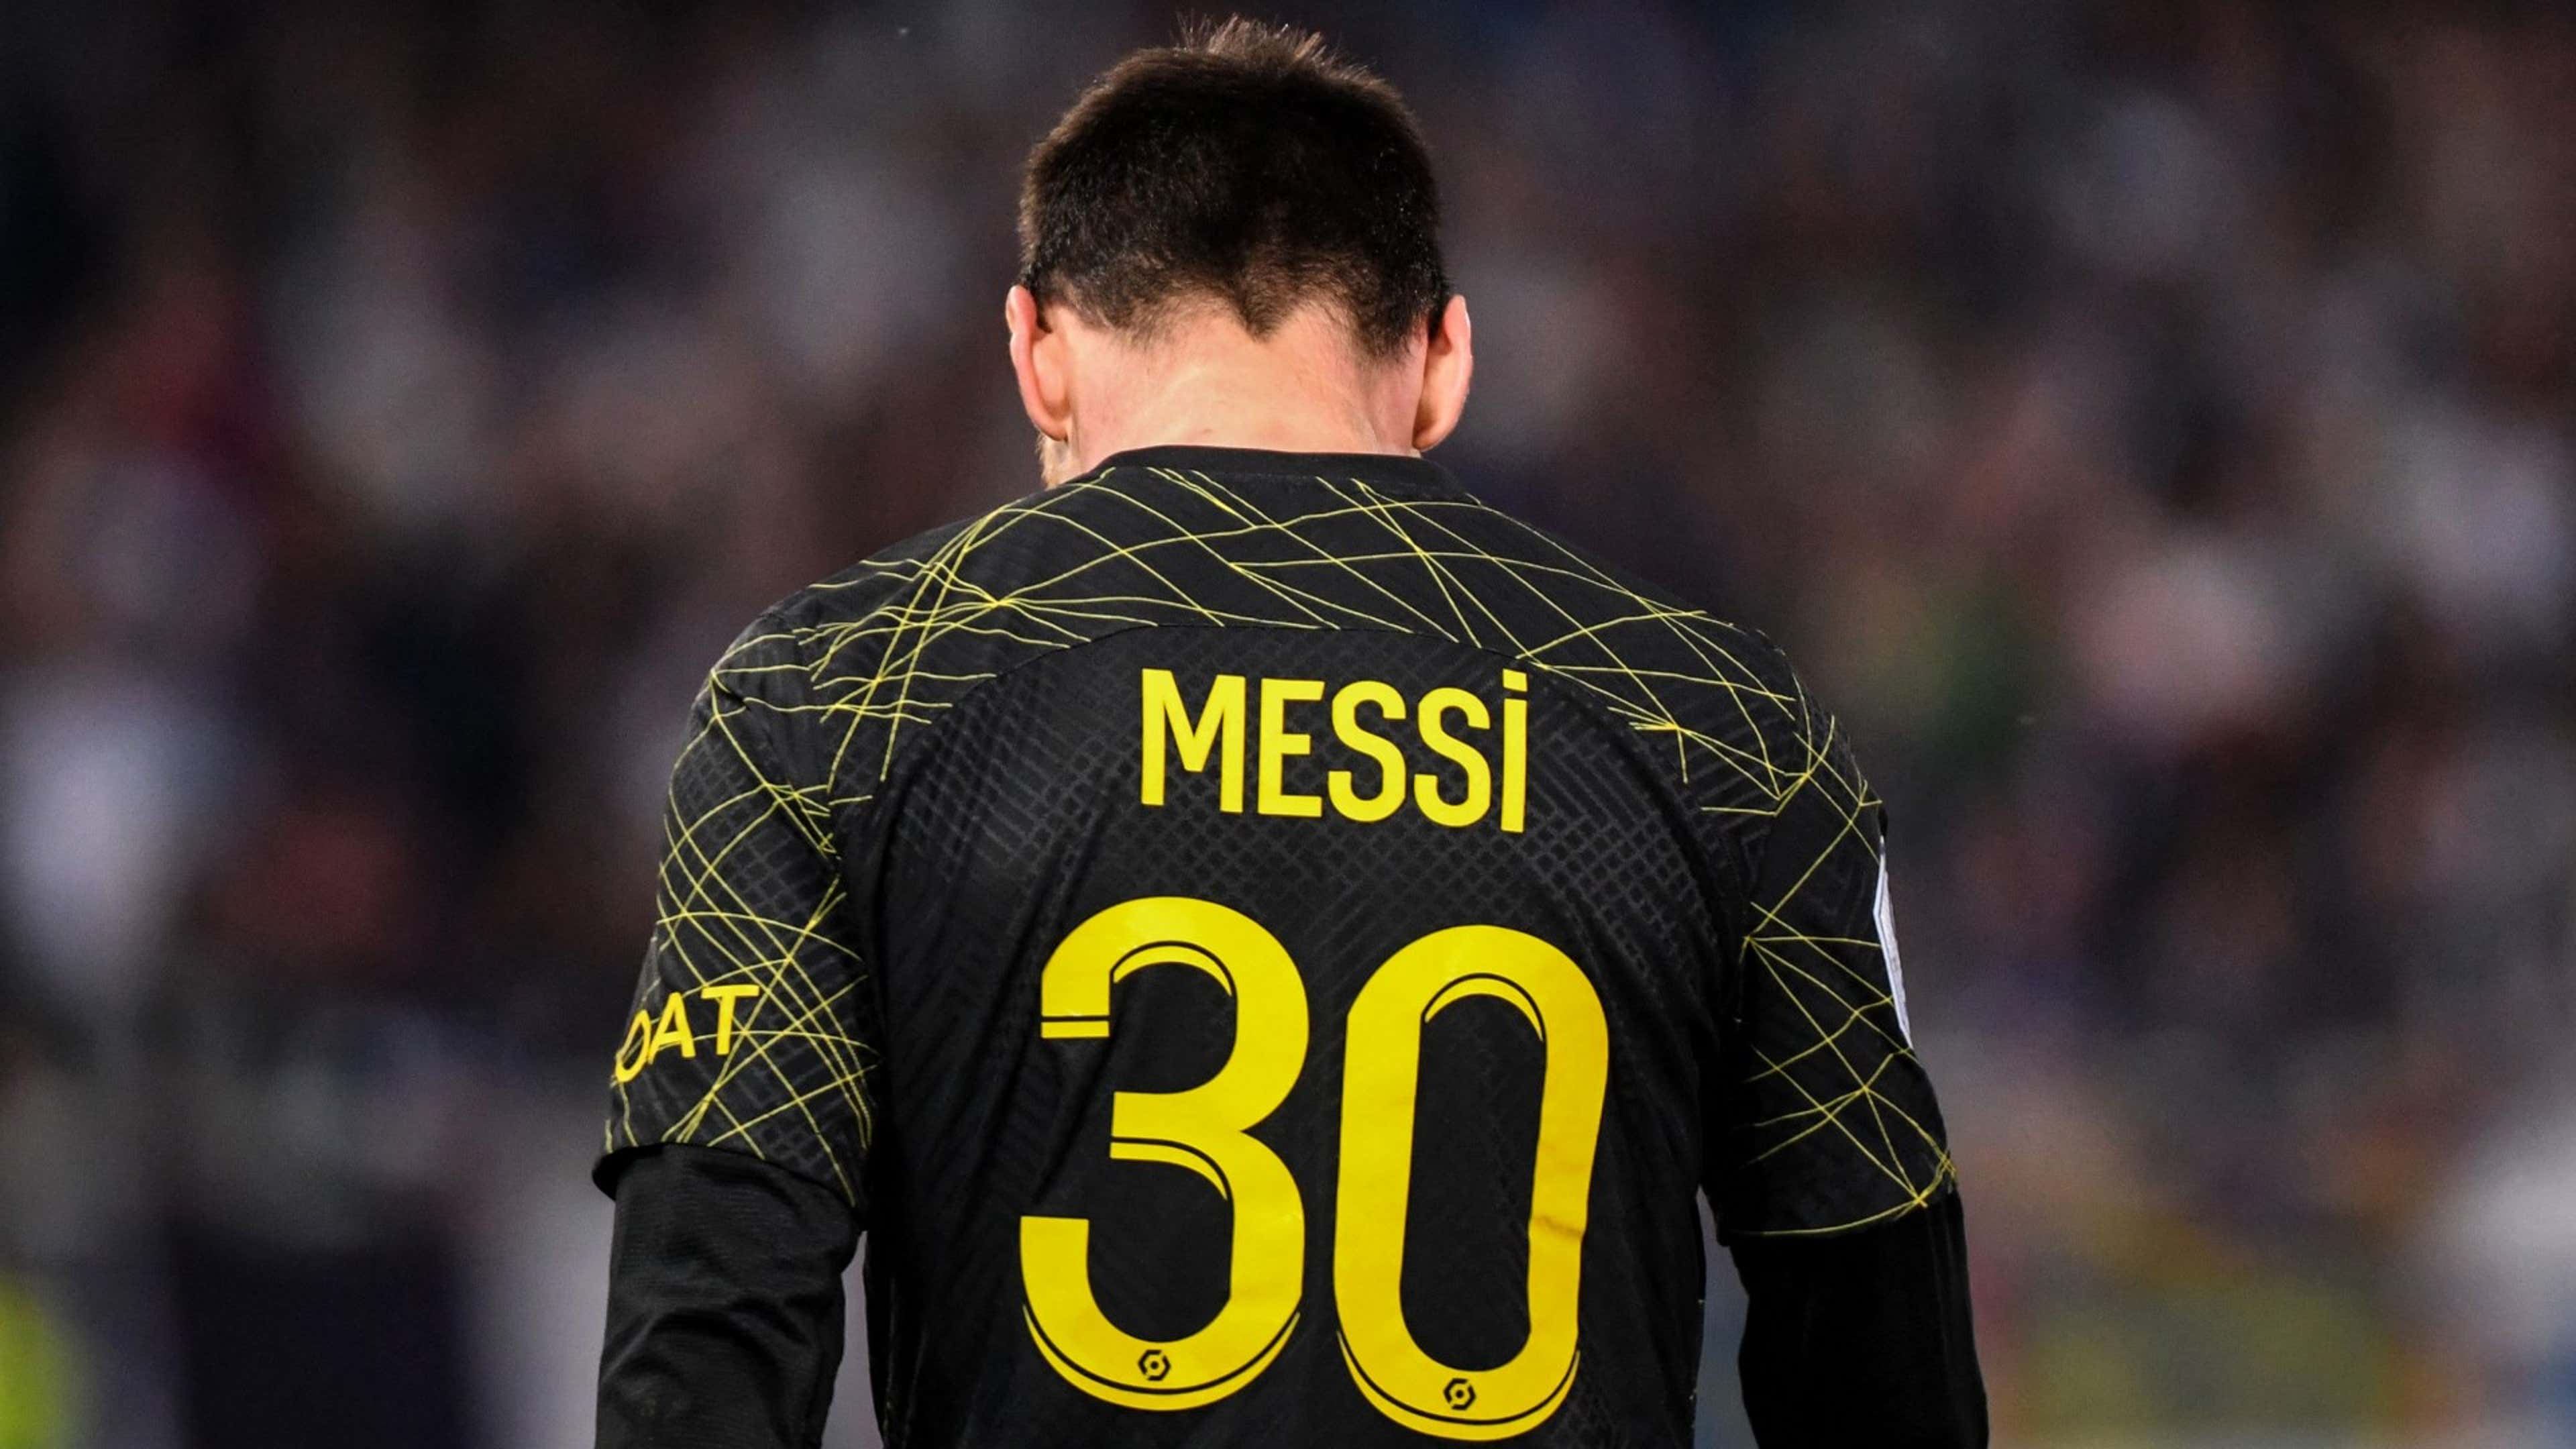 Lionel Messi News, In-Depth Articles, Pictures & Videos